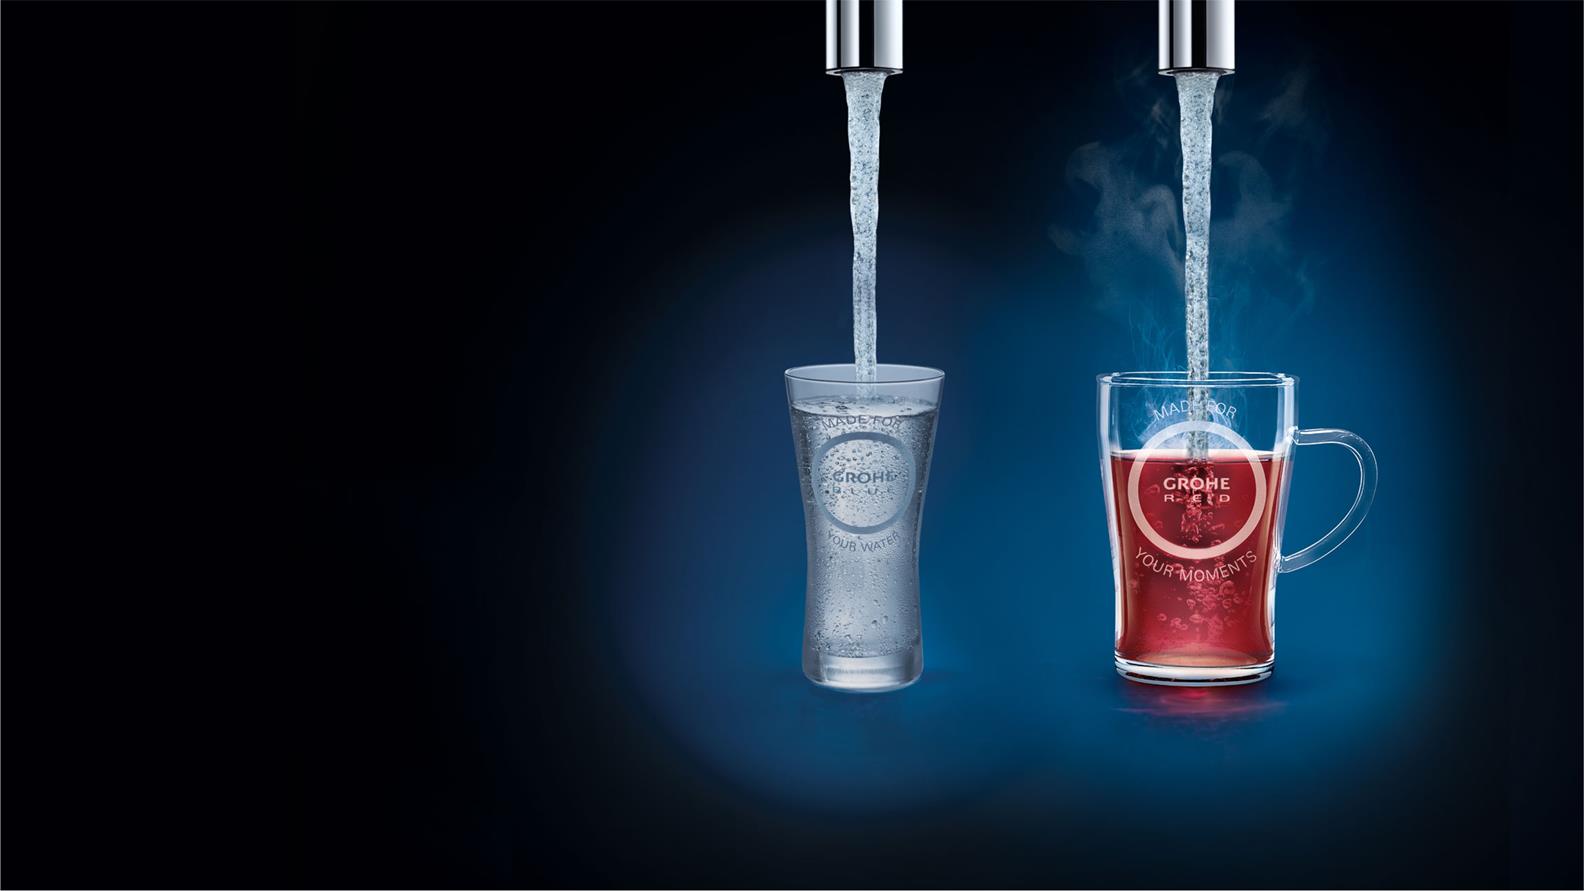 GROHE Water Systems - perfectly chilled, sparkling or boiling hot water